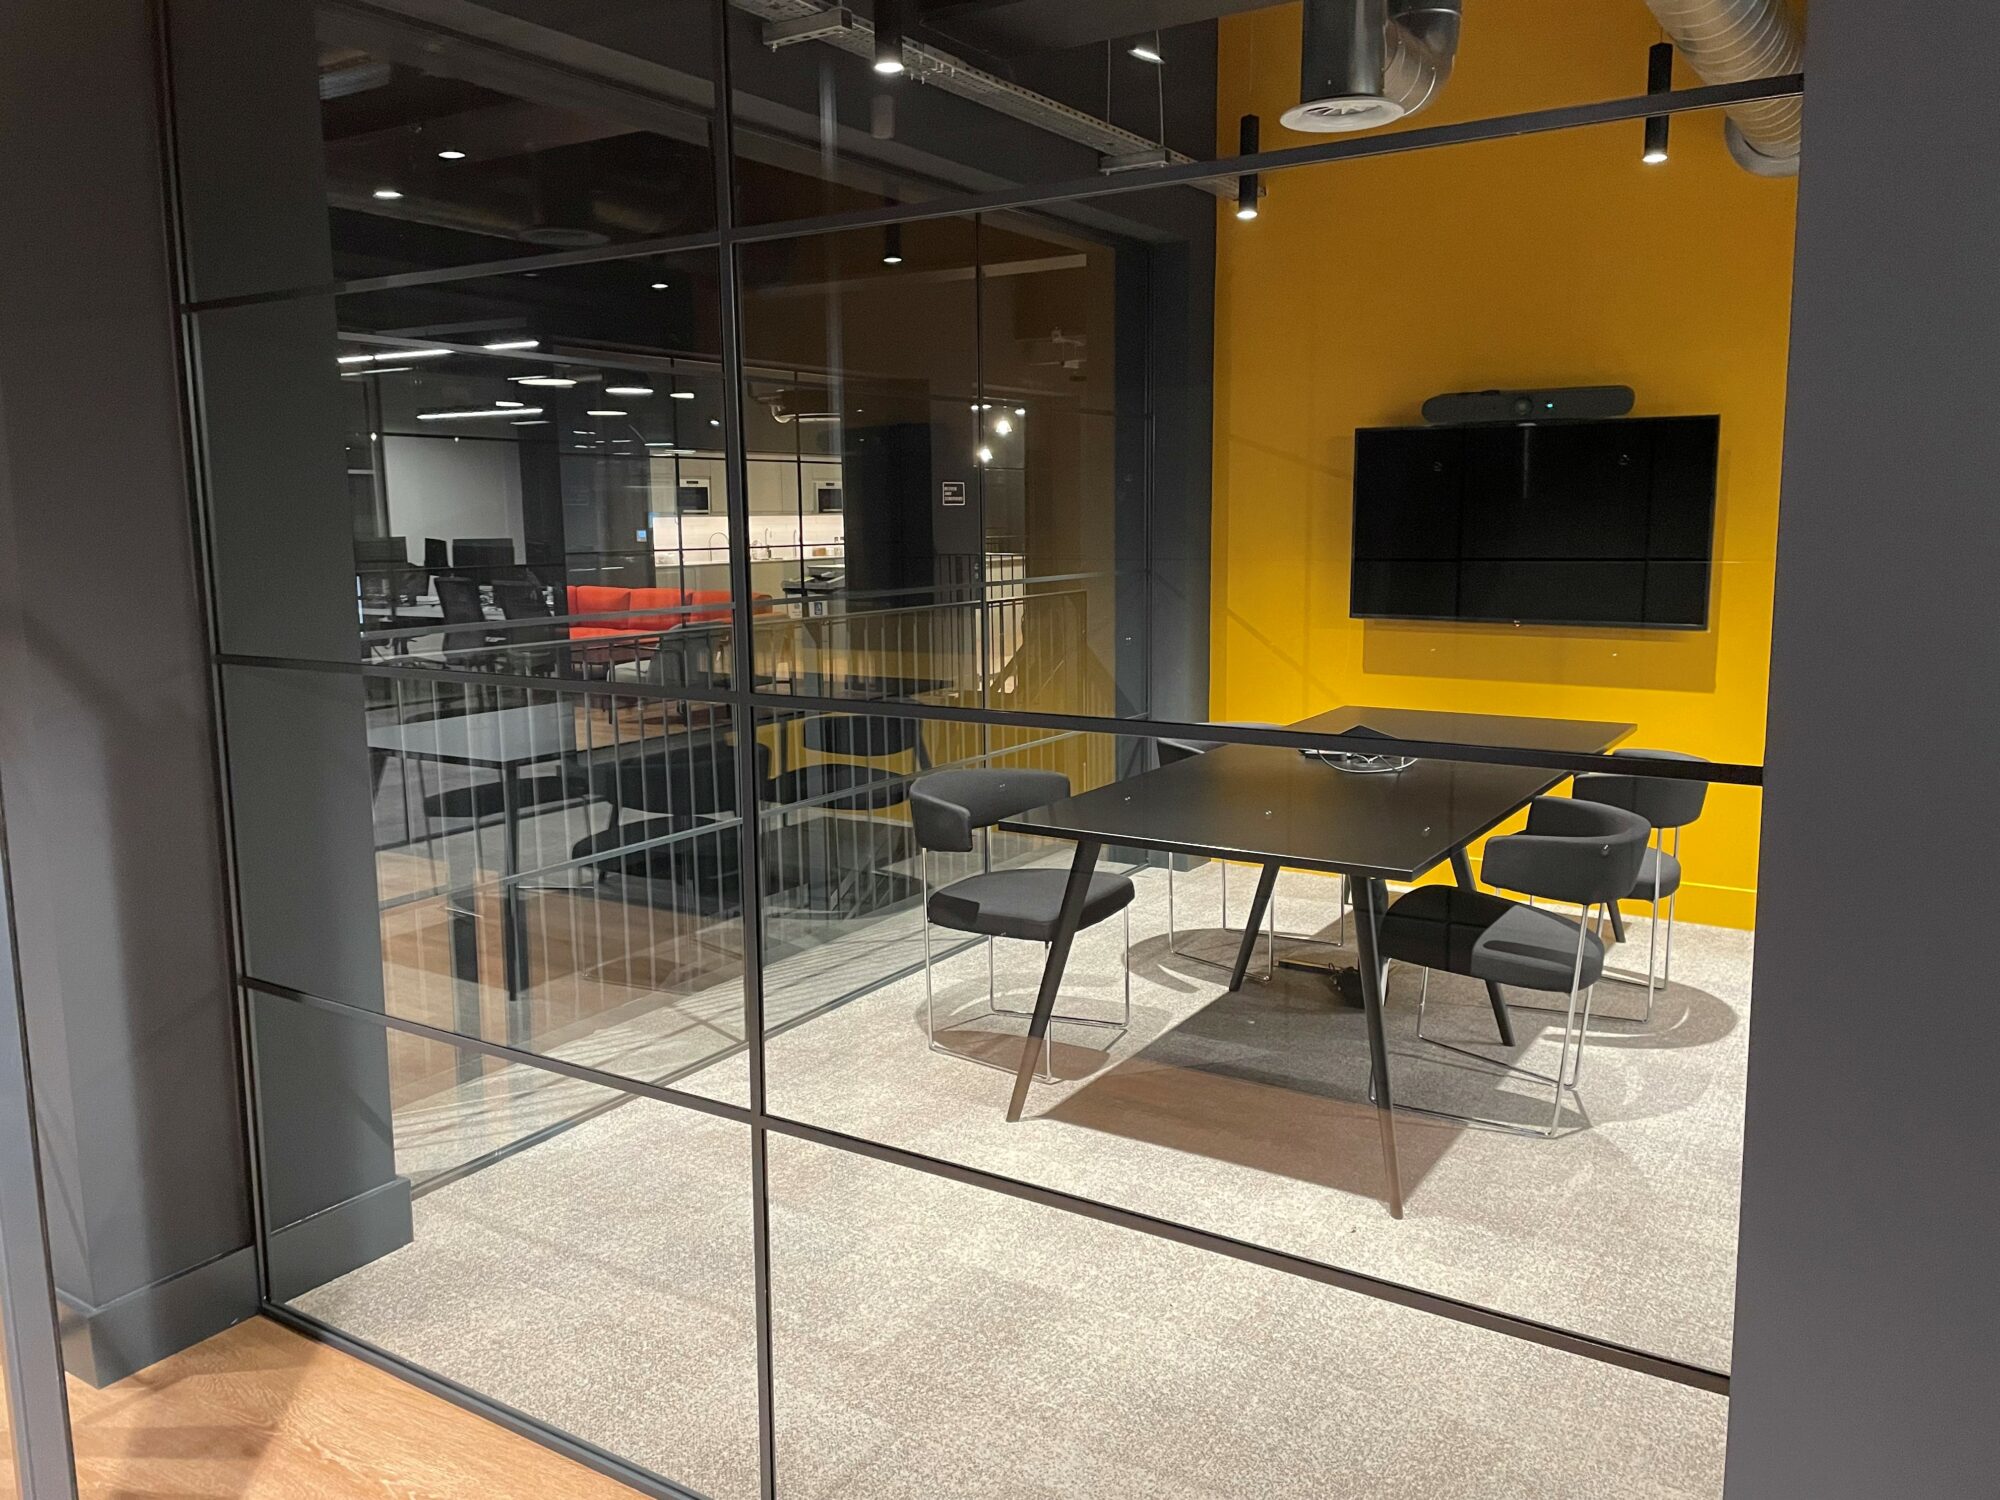 Beevers and Struthers meeting room with glass exterior walls, a yellow back wall and table and chairs inside.